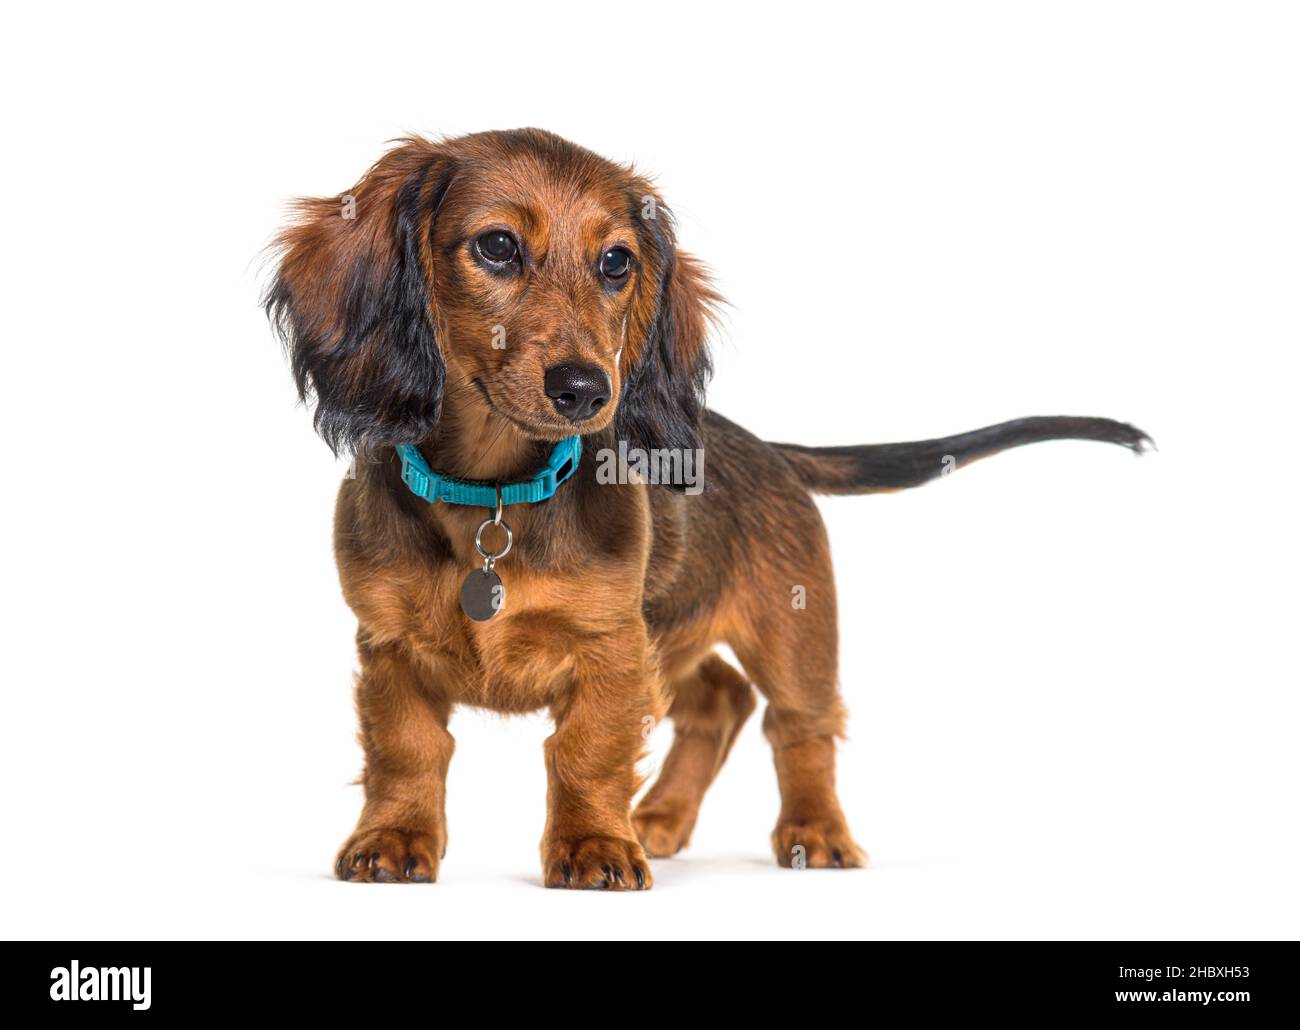 Dachshund wearing a blue dog collar, standing, isolated on white Stock Photo